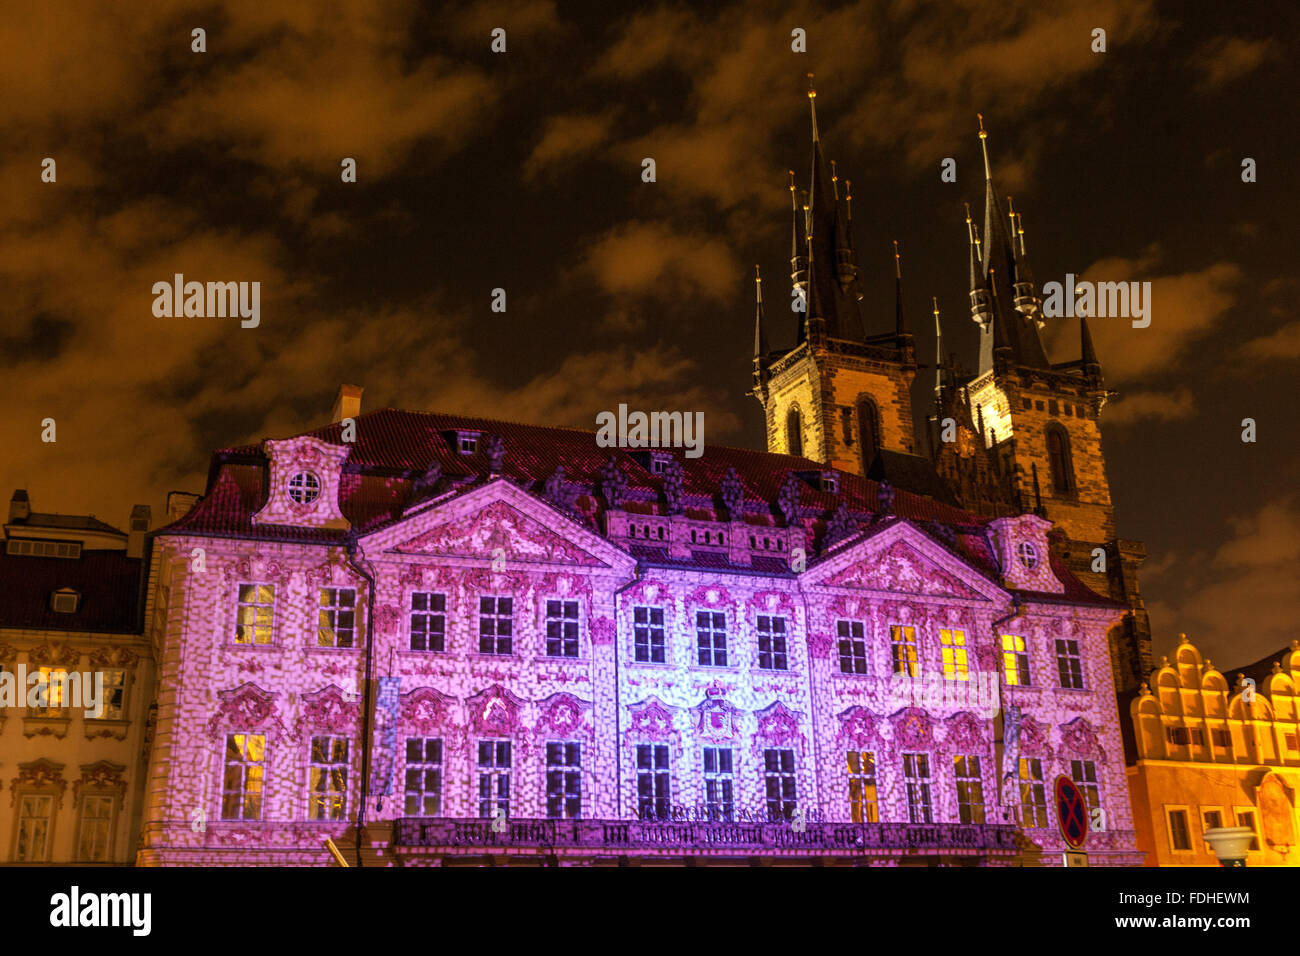 Prague Palace seat of National Gallery, The Rococo style Prague Kinsky Palace illuminated during Prague Festival of Light, Old Town Square, Tyn Church Stock Photo